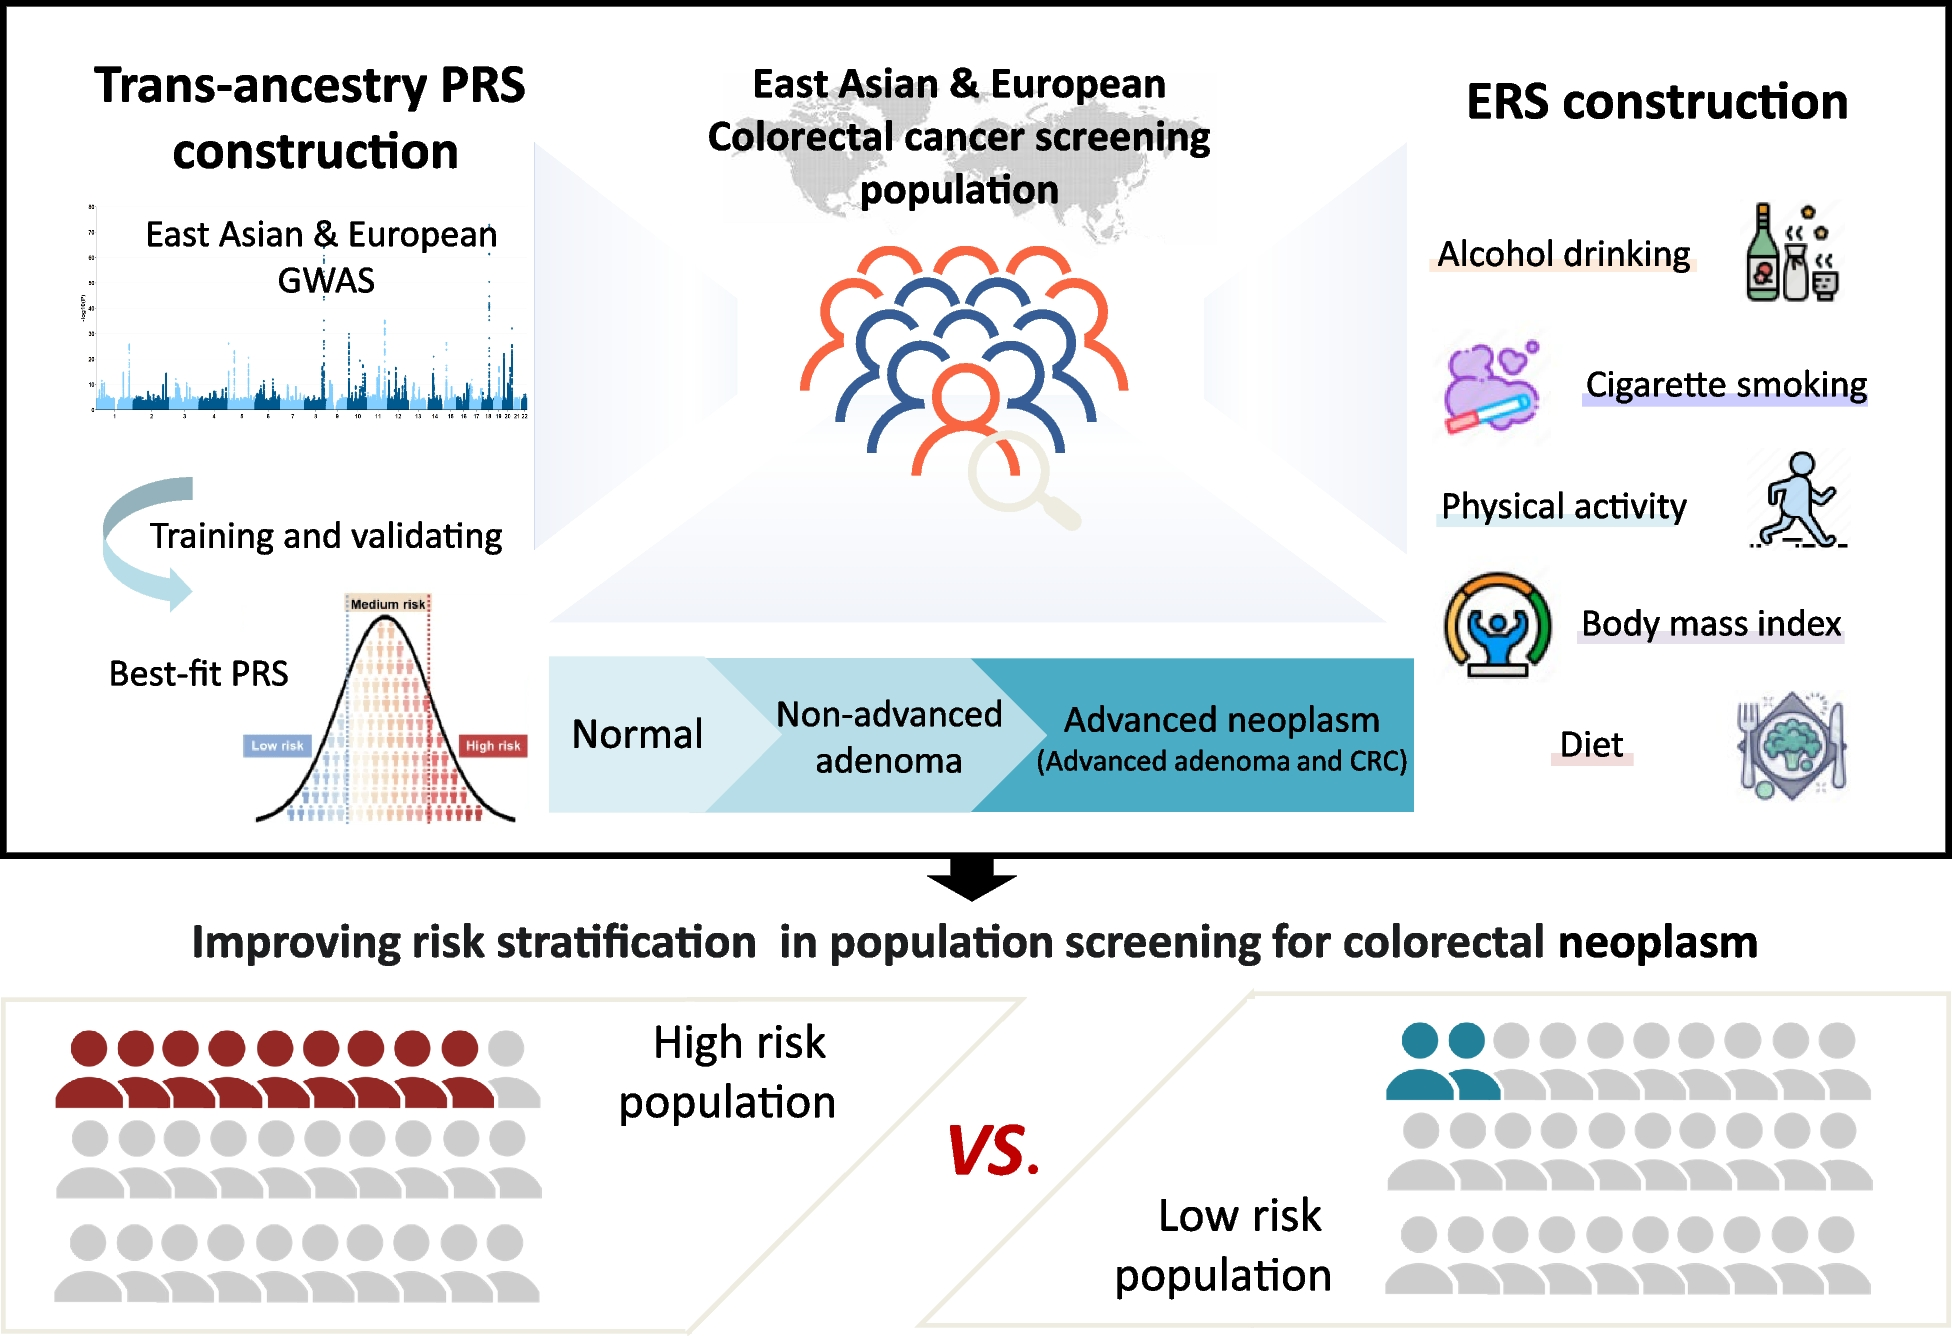 Developing an optimal stratification model for colorectal cancer screening and reducing racial disparities in multi-center population-based studies